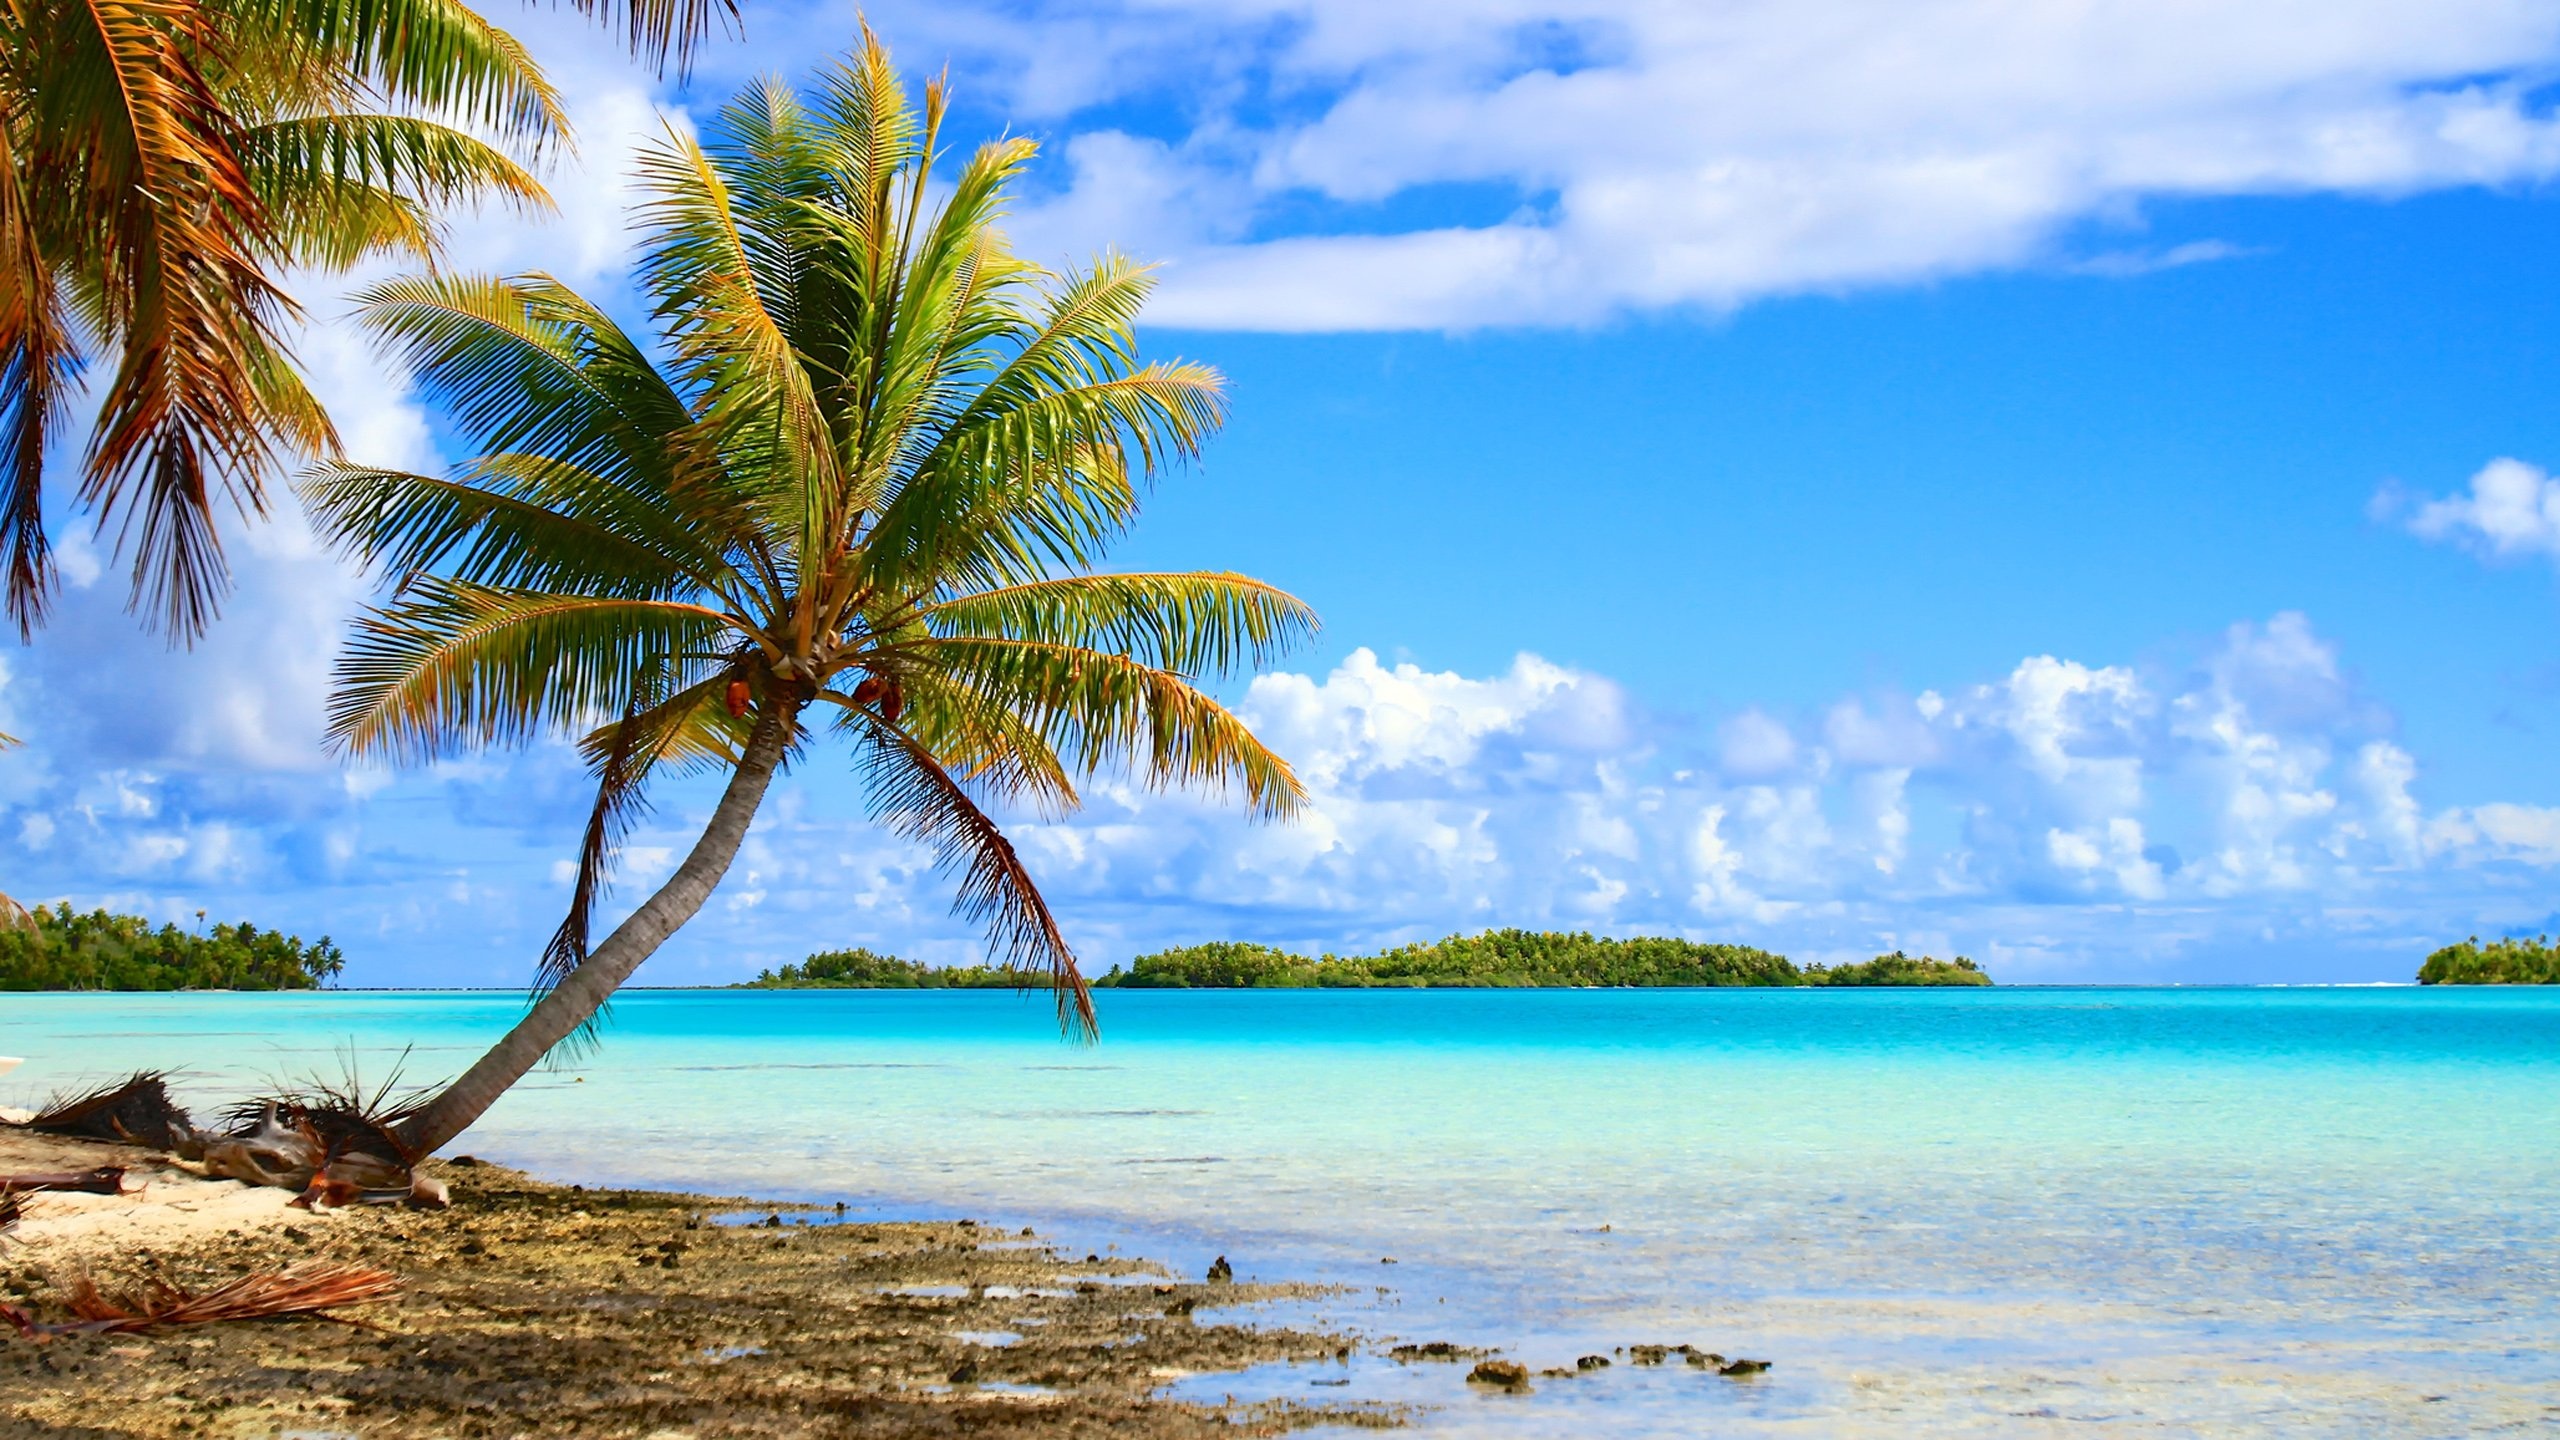 French Polynesia beaches and reefs, Idyllic beauty, Snorkeling and diving paradise, 2560x1440 HD Desktop